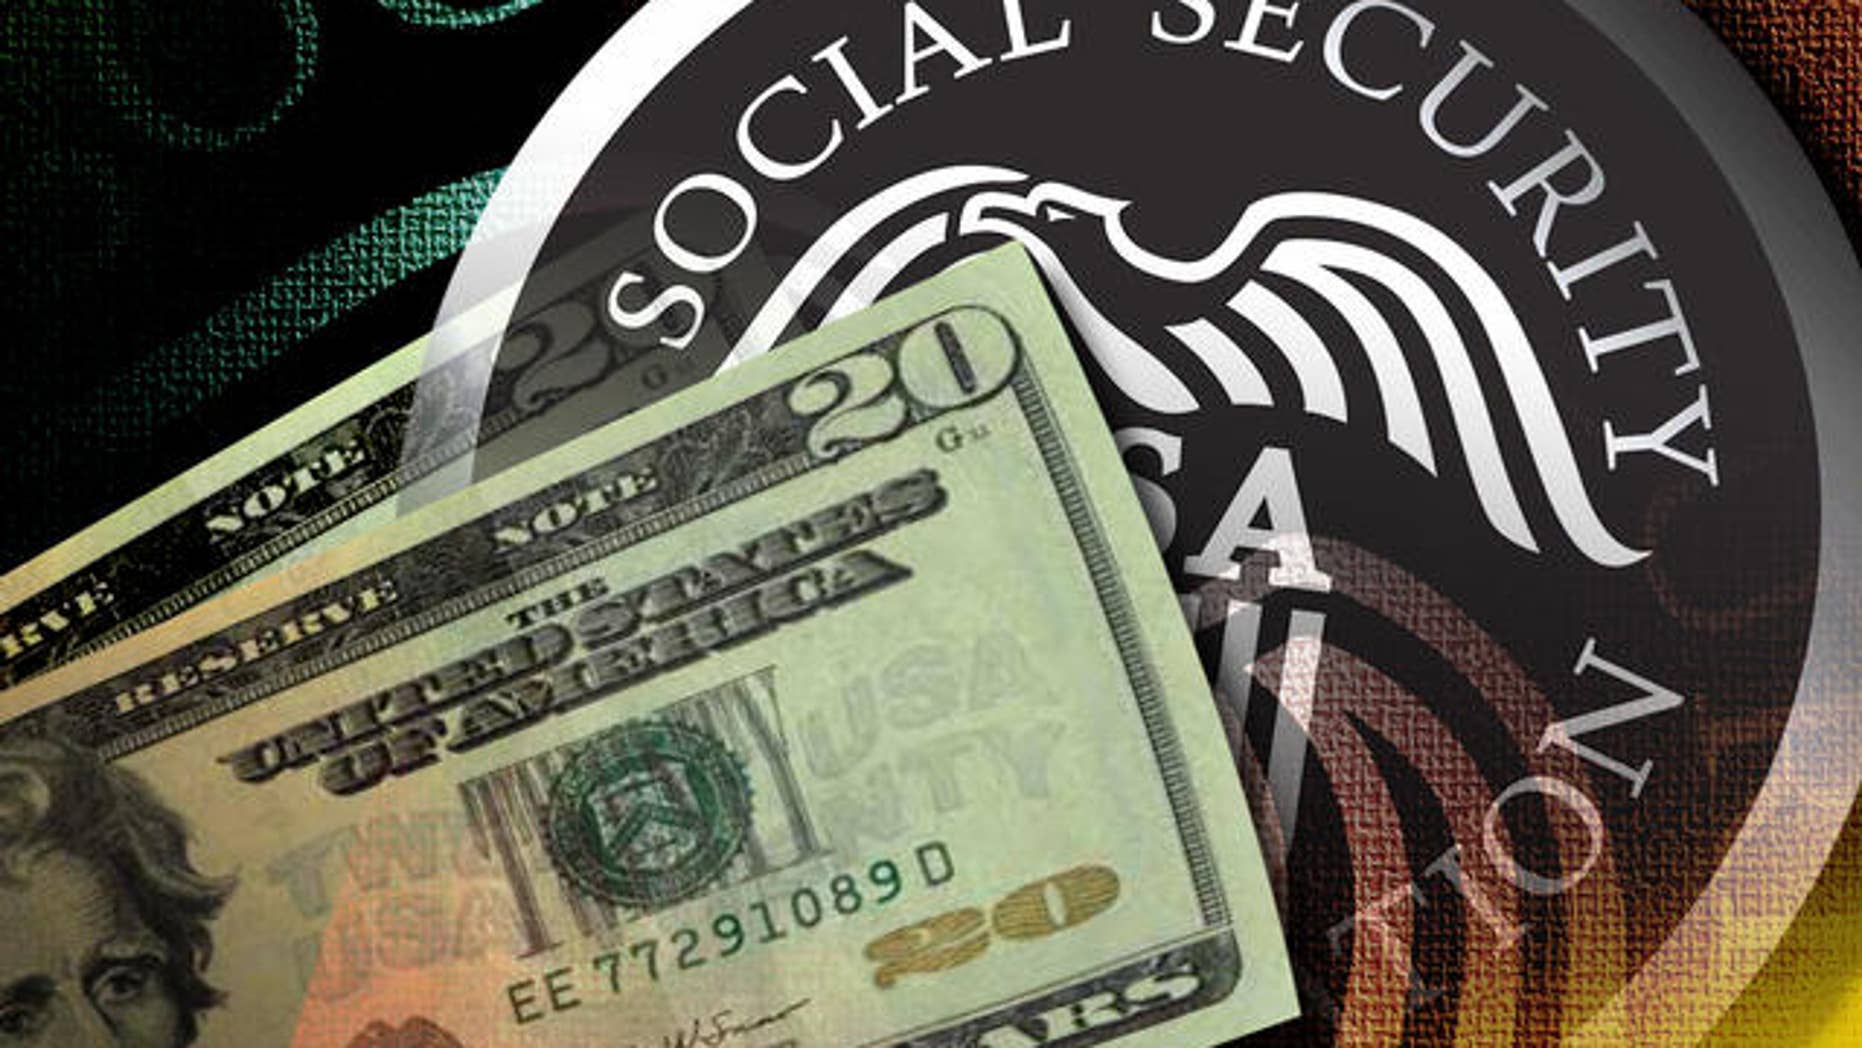 Social Security Checks Could Be Delayed Without Debt Ceiling